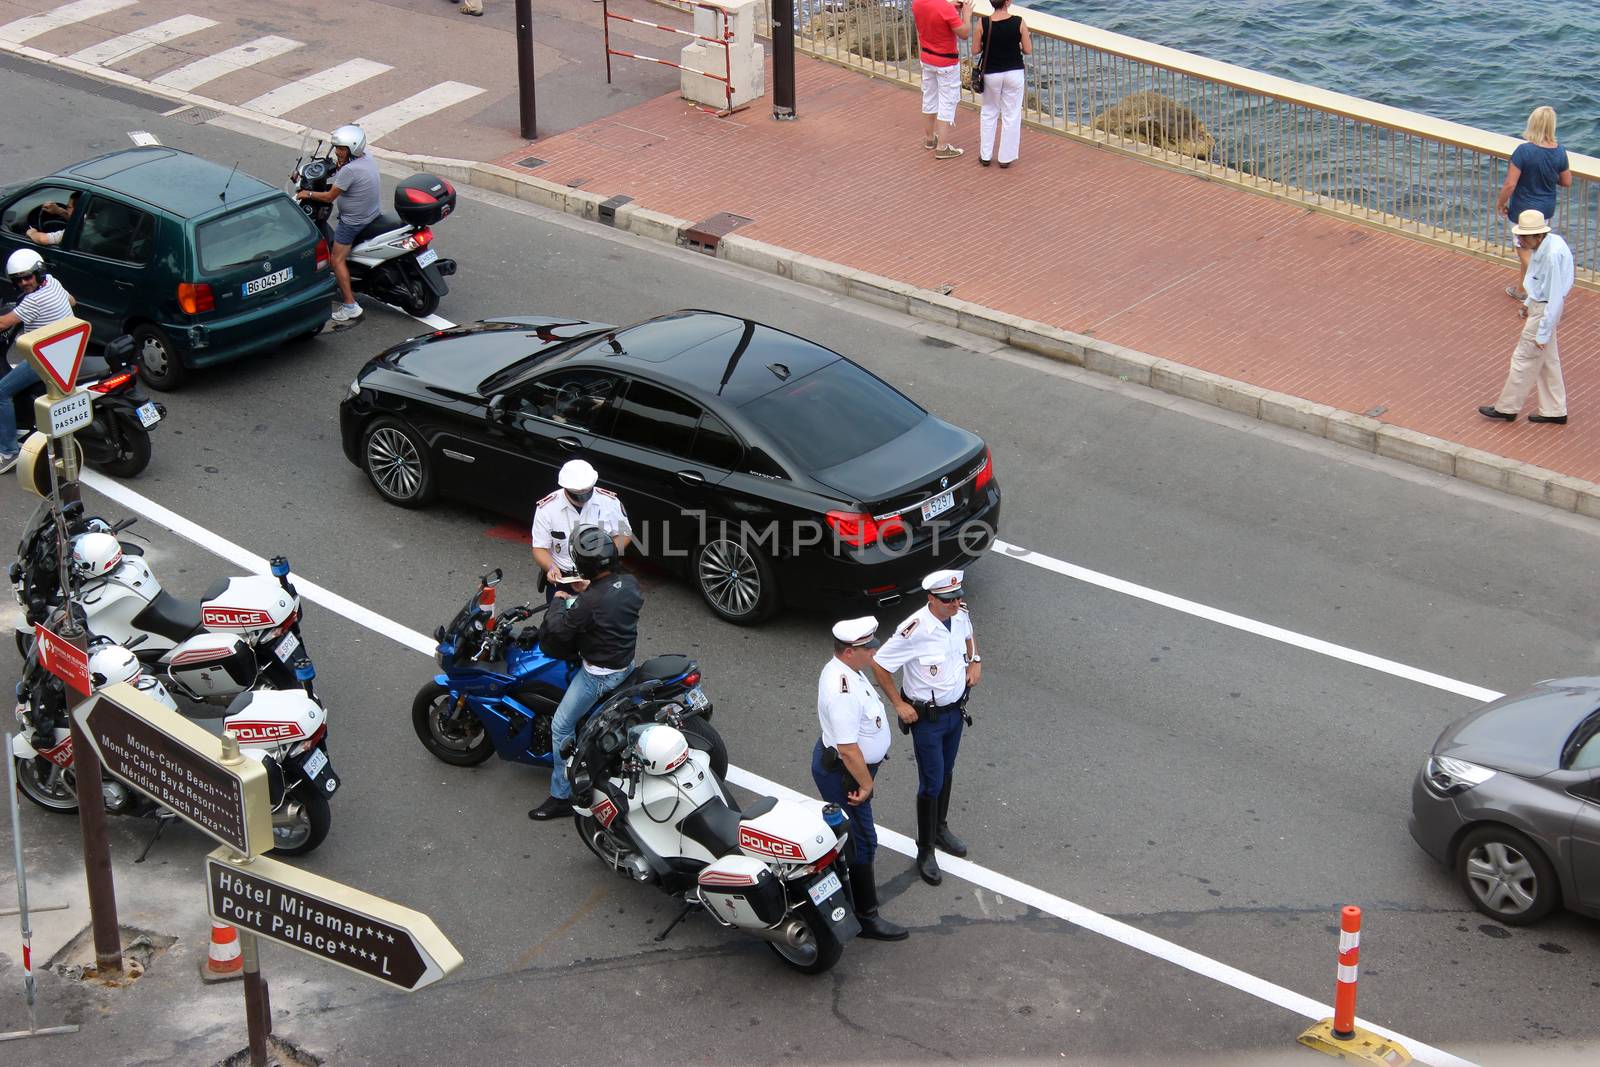 Monte-Carlo, Monaco - June 9, 2015: Aerial View of Monegasque Police Officers on the Street in Monaco. South of France